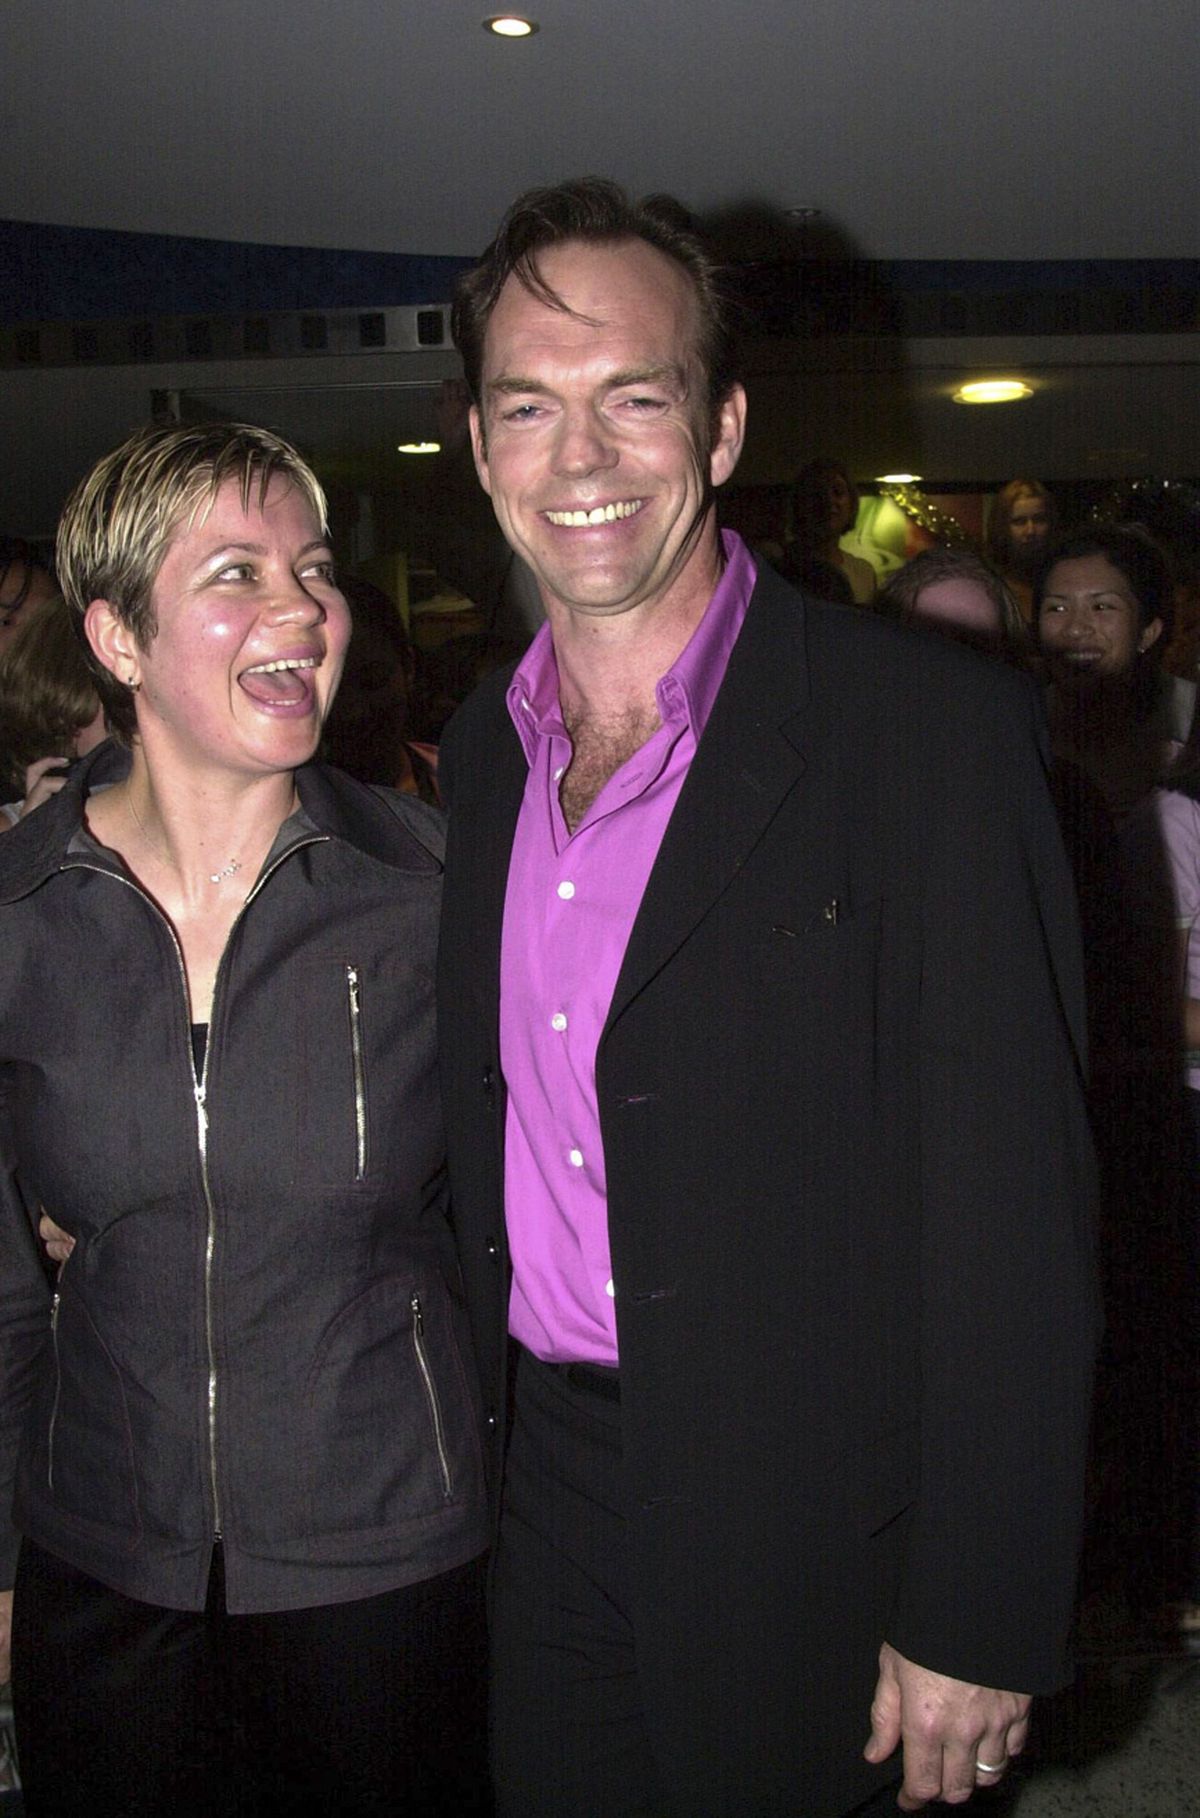 Hugo Weaving (right) and his partner Katrina Greenwood (left) on the red carpet at the Sydney premiere of The Lord of the Rings: The Fellowship of the Ring